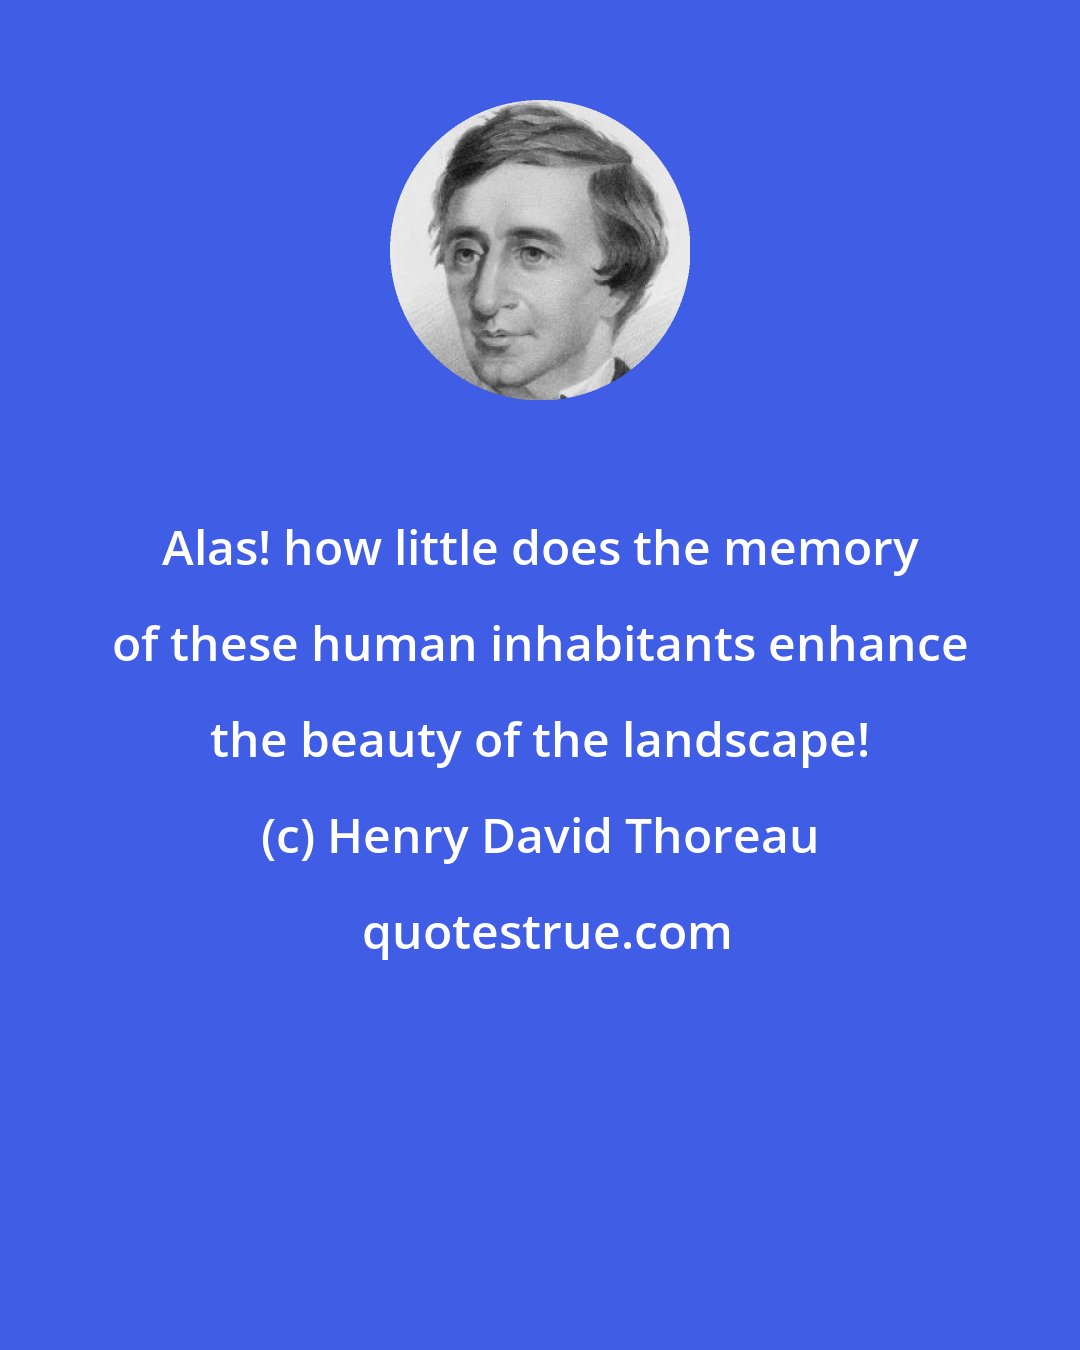 Henry David Thoreau: Alas! how little does the memory of these human inhabitants enhance the beauty of the landscape!